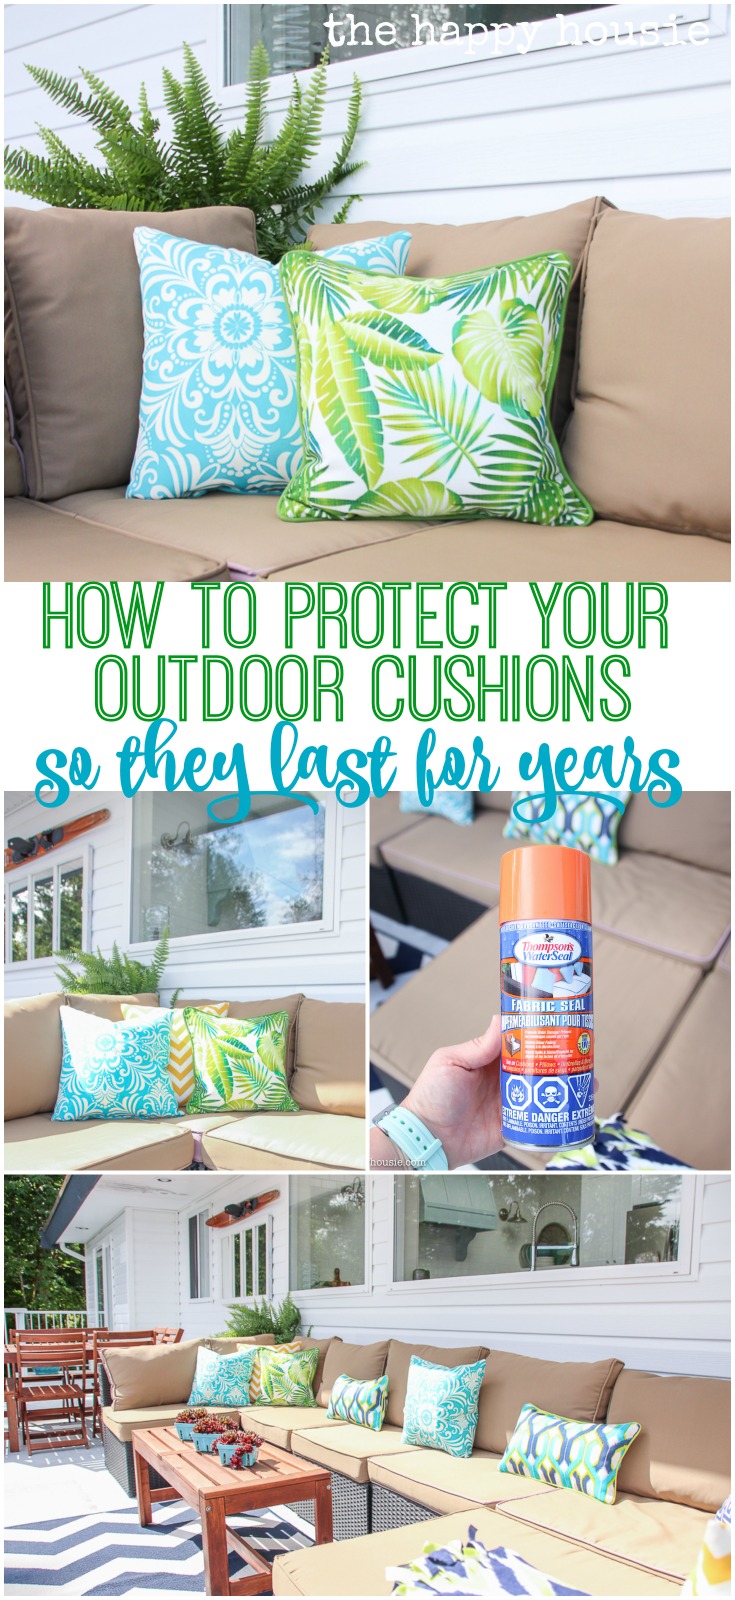 How To Protect Your Outdoor Cushions, Can You Leave Outdoor Cushions Outside Overnight